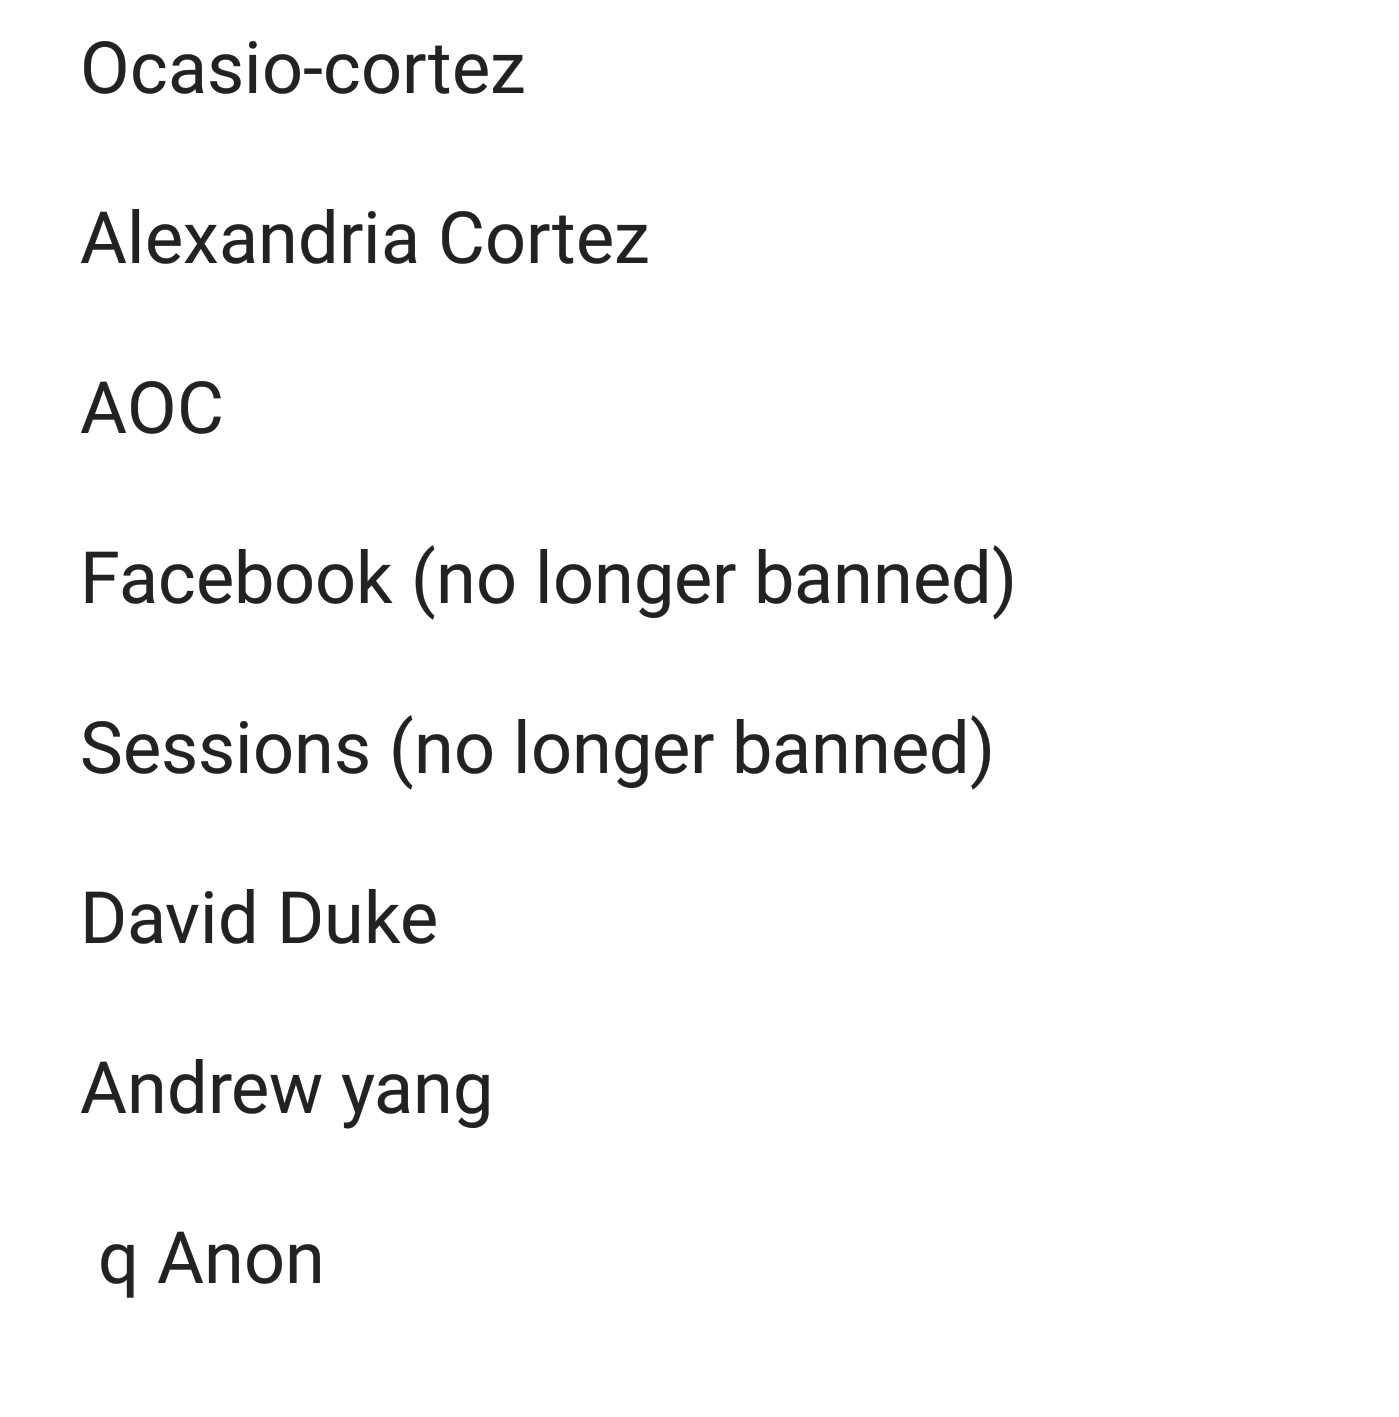 Keywords blacklisted in the_donald (proving that are moderators are controlled opposition)